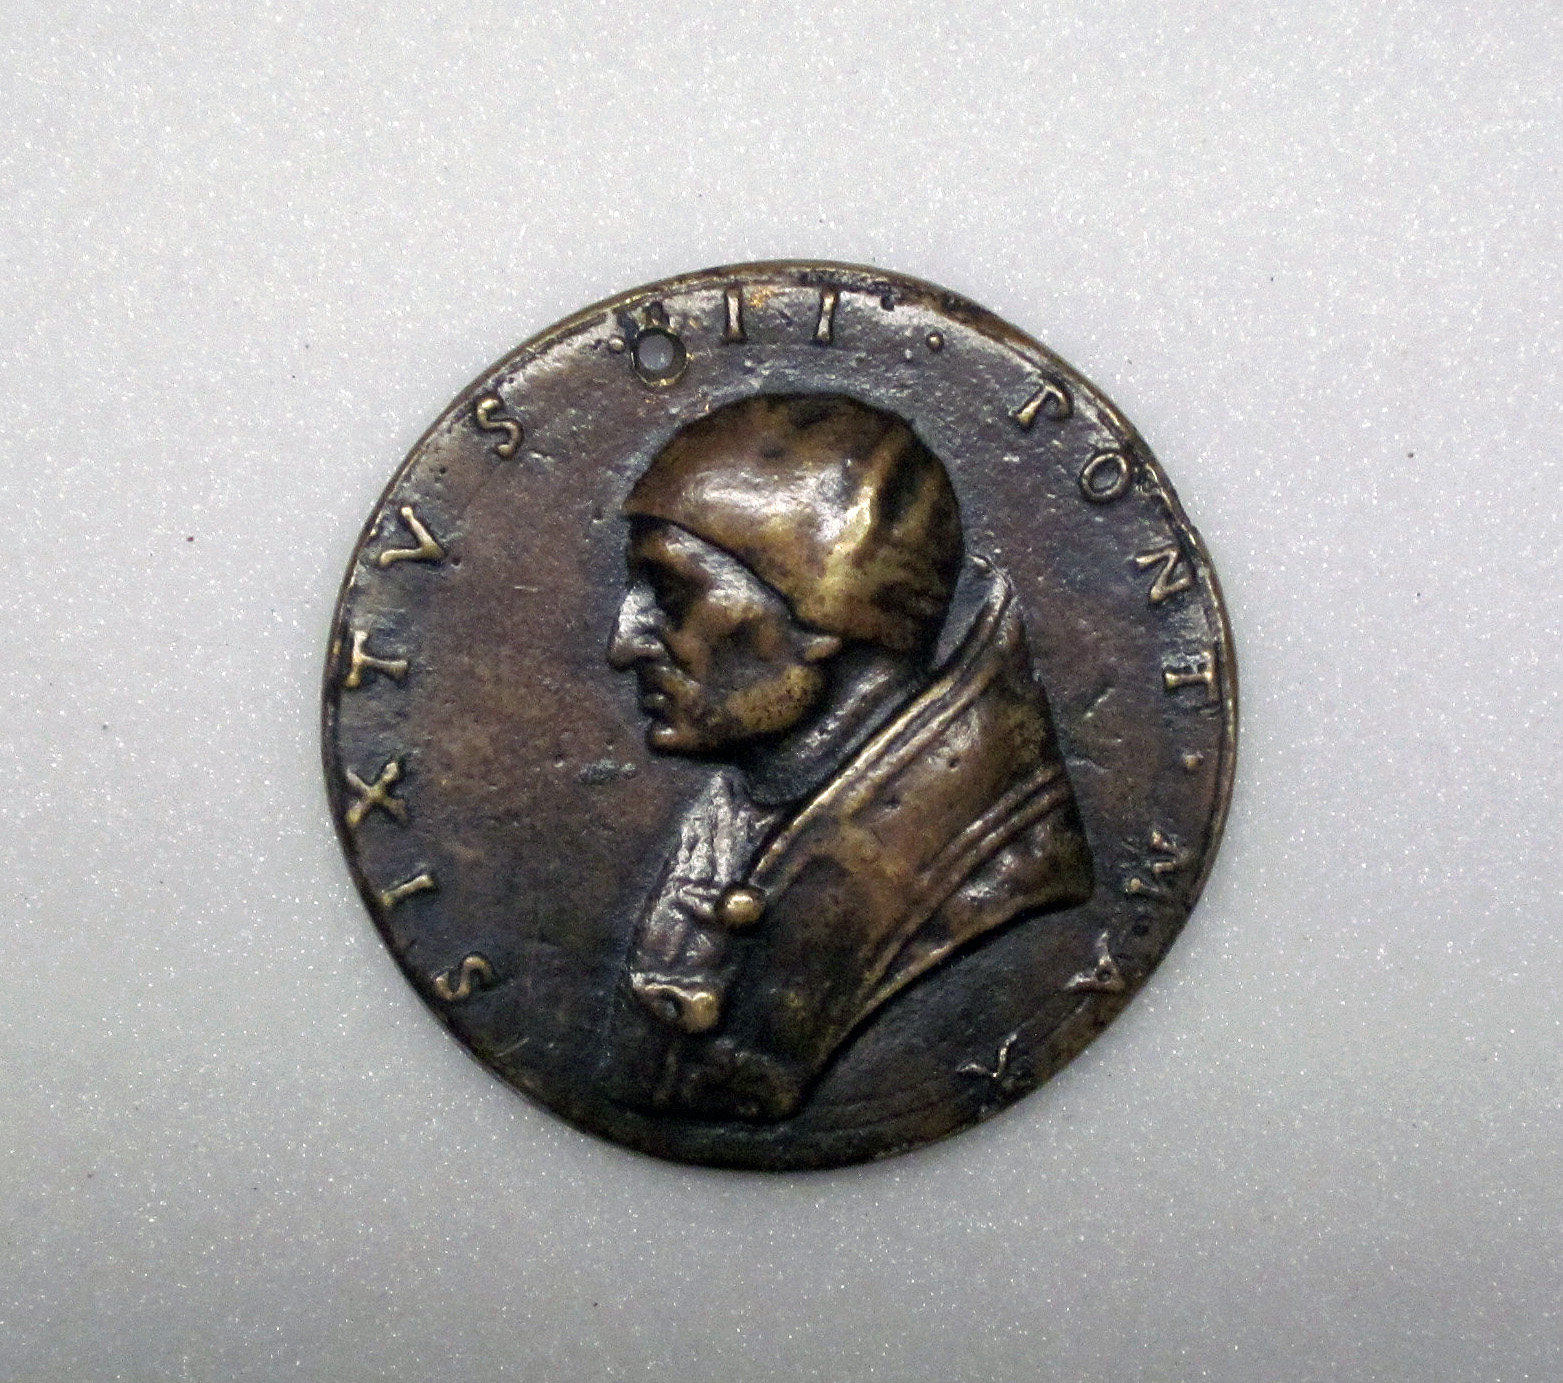 1198-1893, medal showing Pope St. Sixtus II, Italy, 16th century (C) Victoria and Albert Museum, London